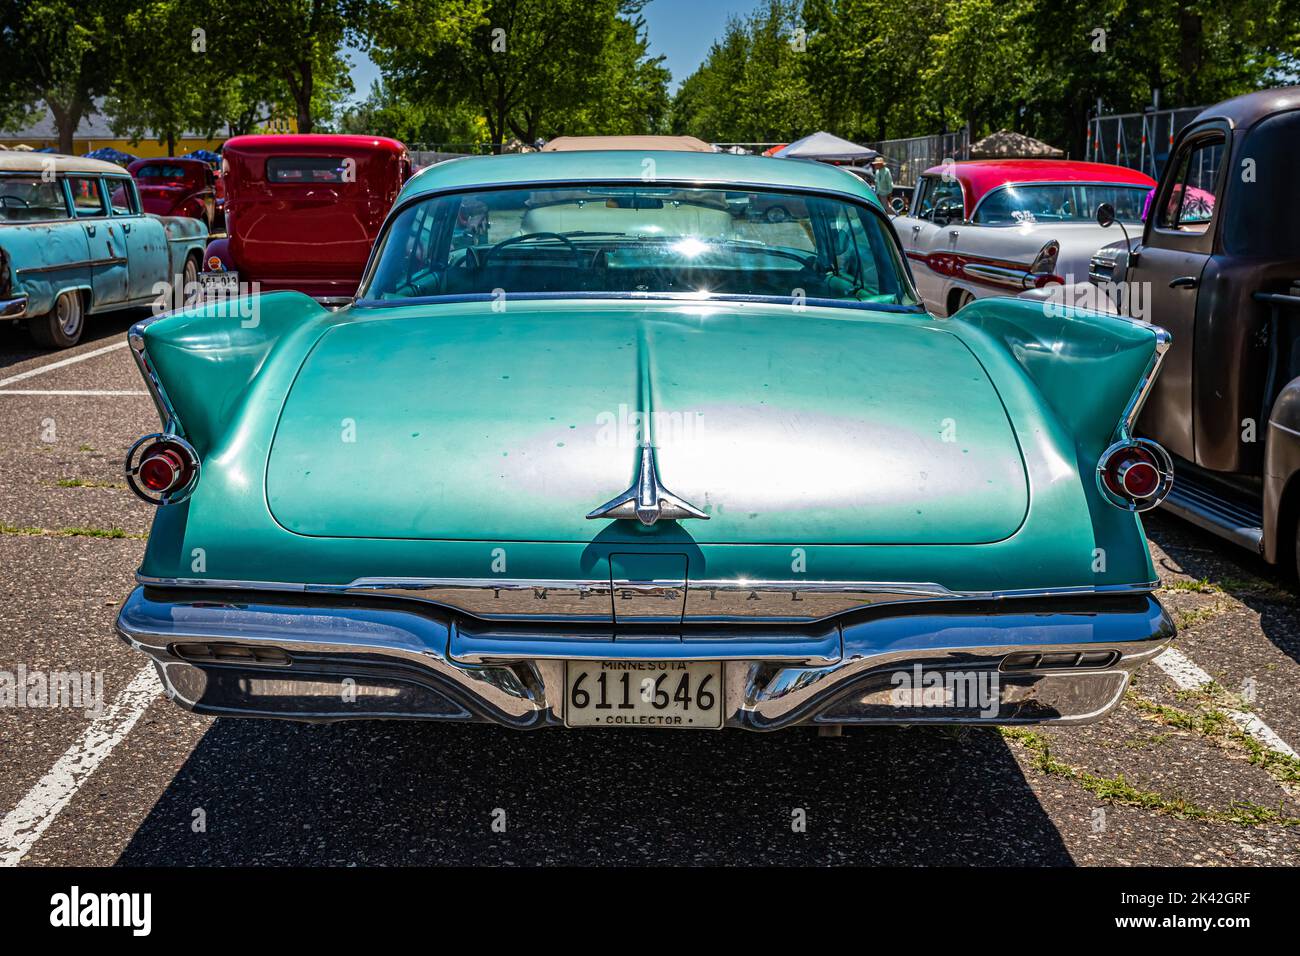 Falcon Heights, MN - June 18, 2022: High perspective rear view of a 1961 Chrysler Imperial Crown 4 Door Hardtop at a local car show. Stock Photo